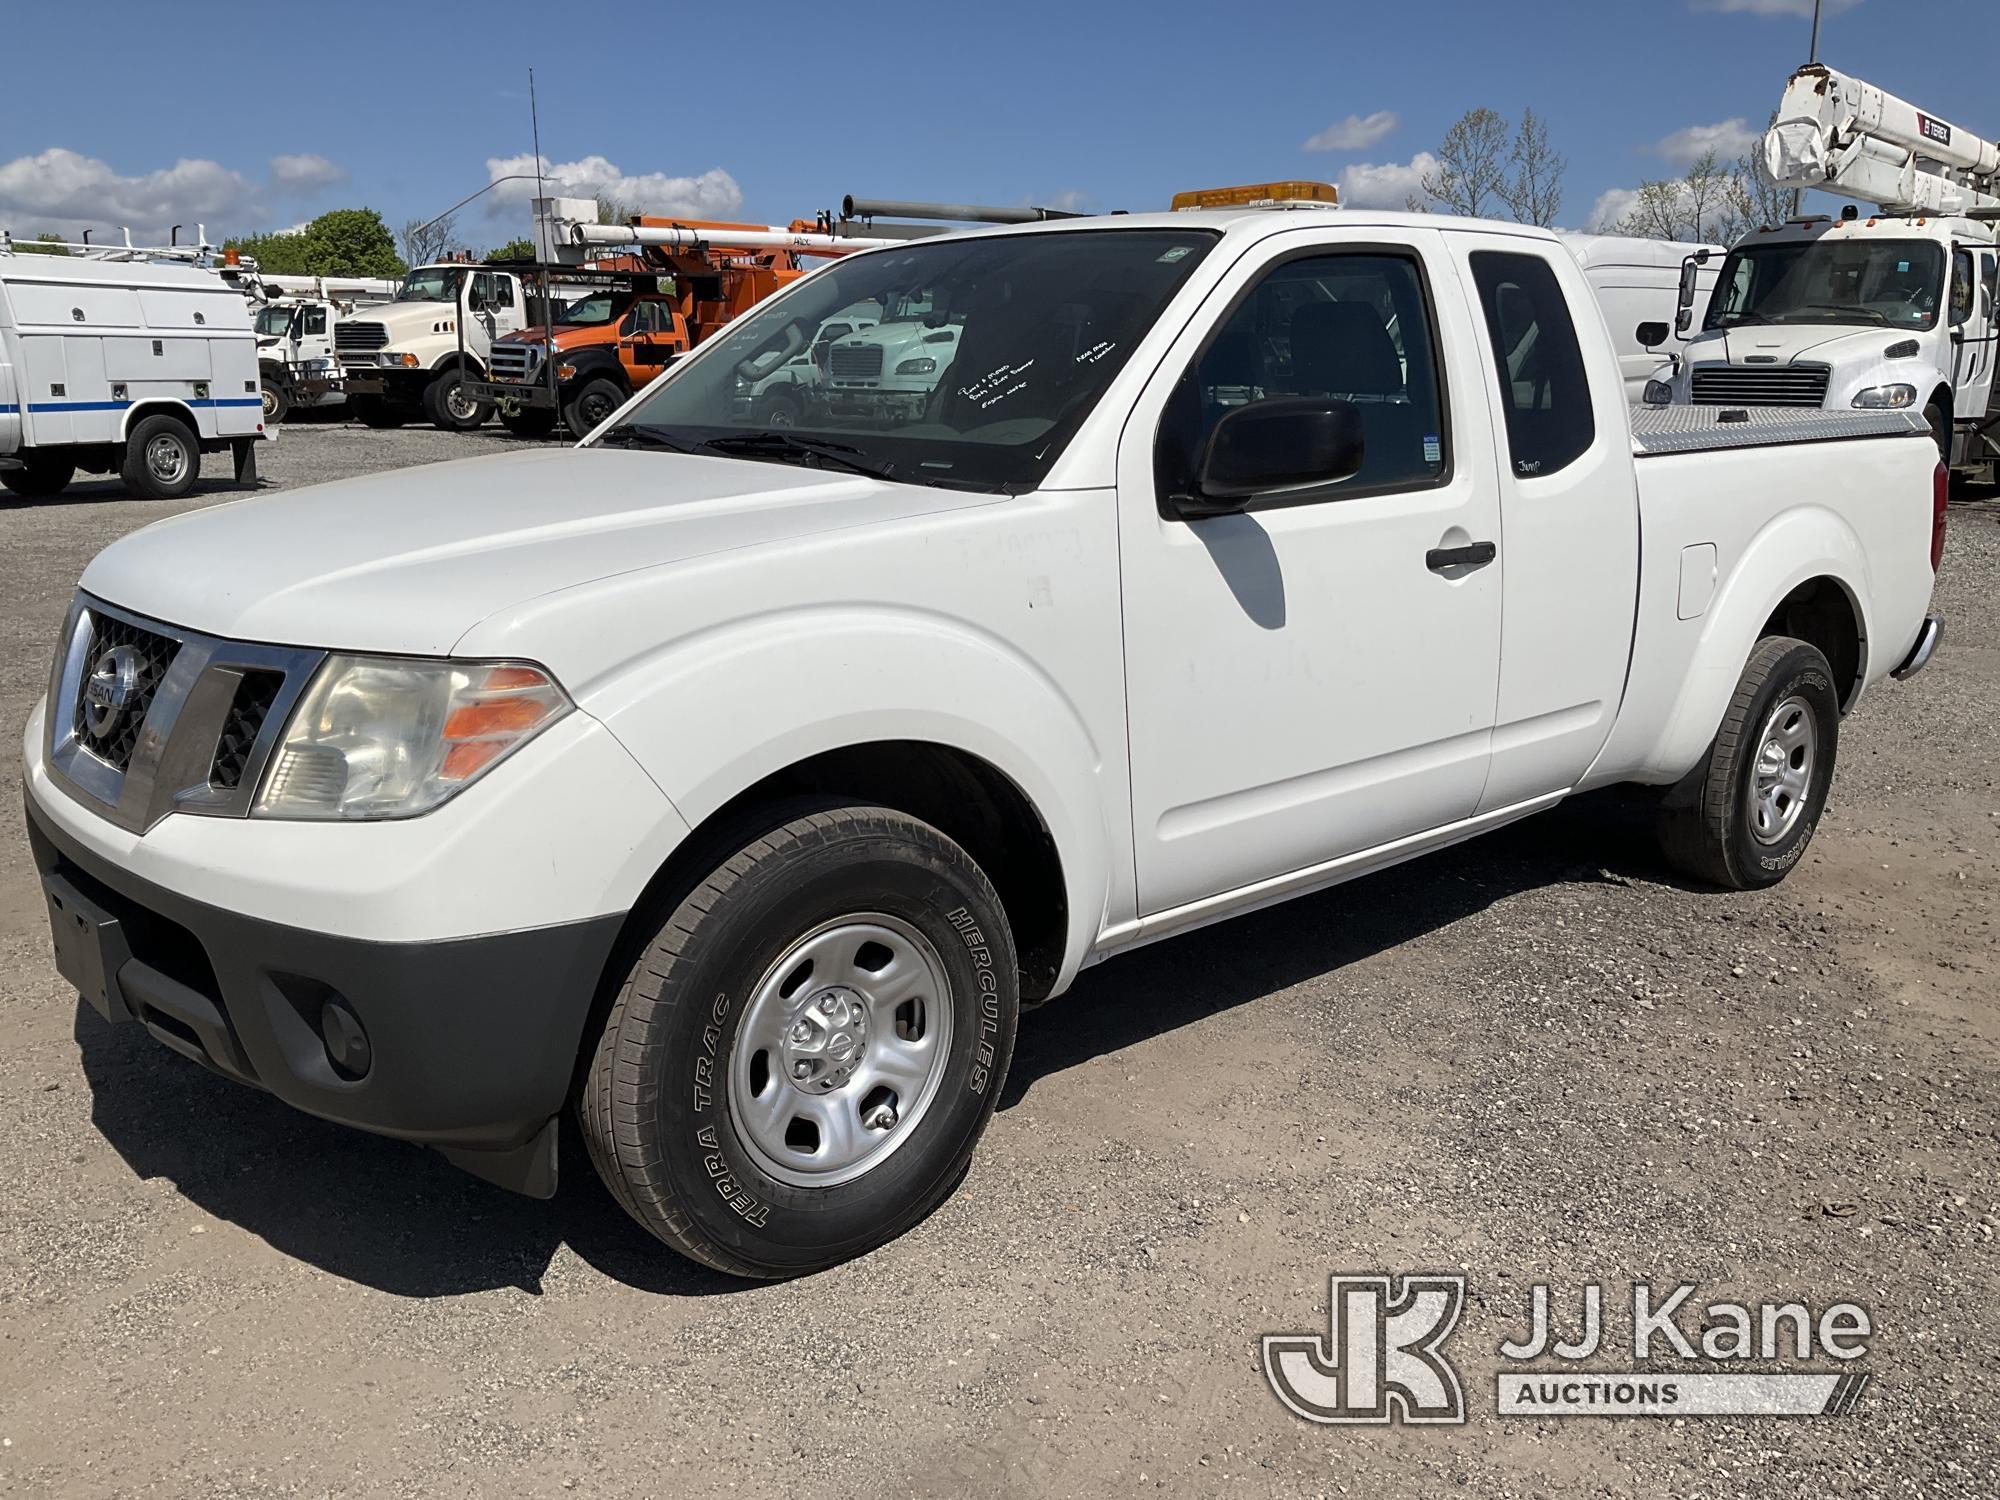 (Plymouth Meeting, PA) 2014 Nissan Frontier Extended-Cab Pickup Truck Runs & Moves, Engine Noise, Bo